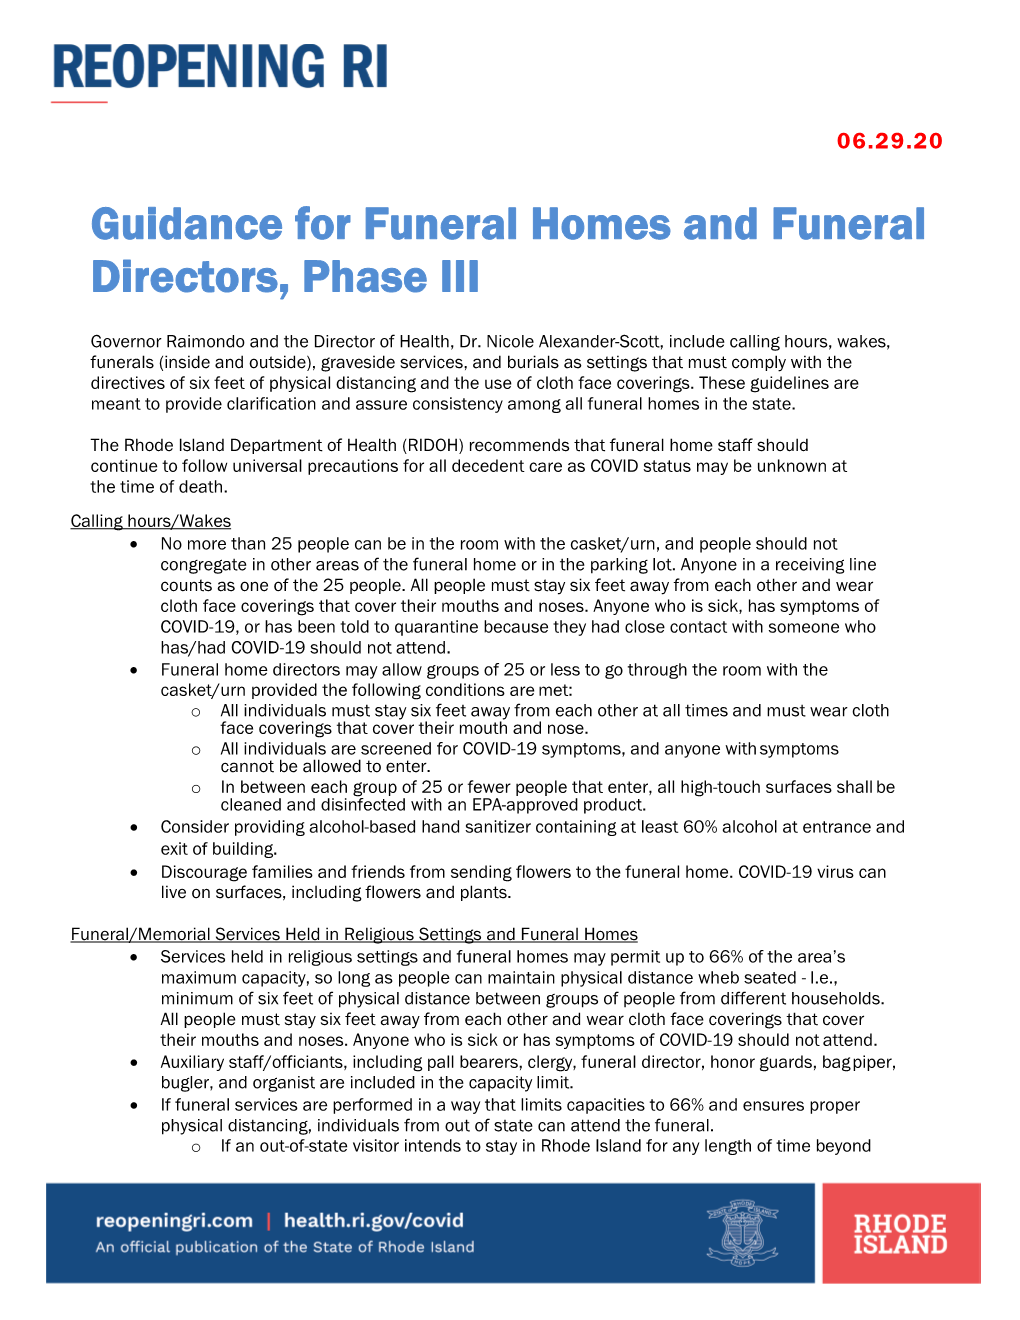 Guidance for Funeral Homes and Funeral Directors, Phase III